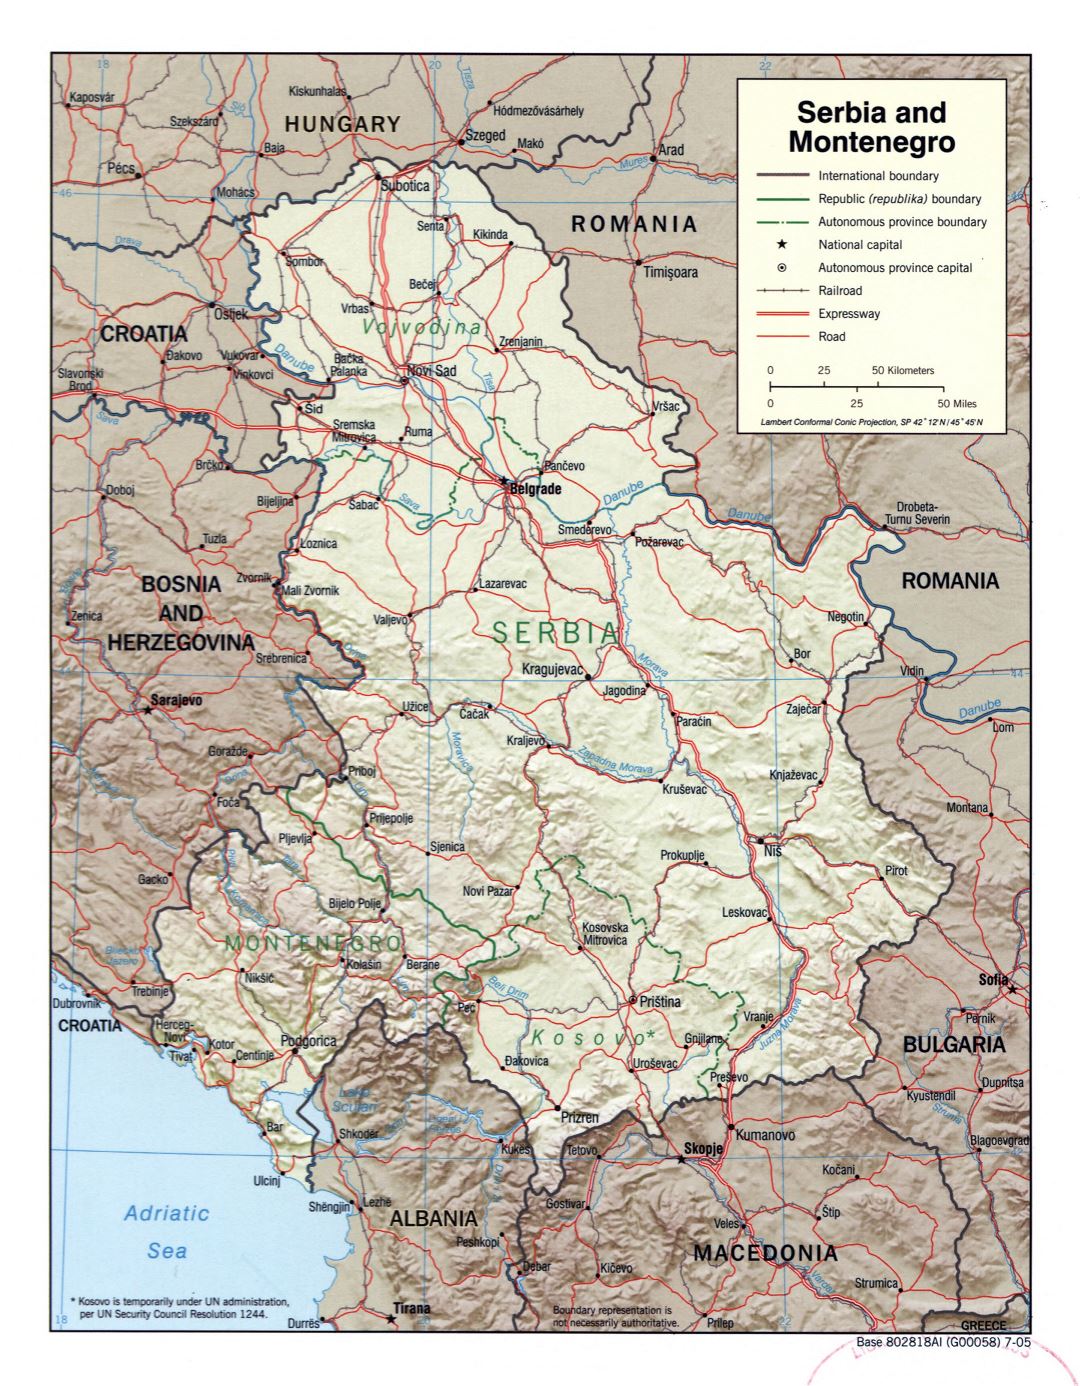 Large scale political map of Serbia and Montenegro with relief, roads, railroads and major cities - 2005